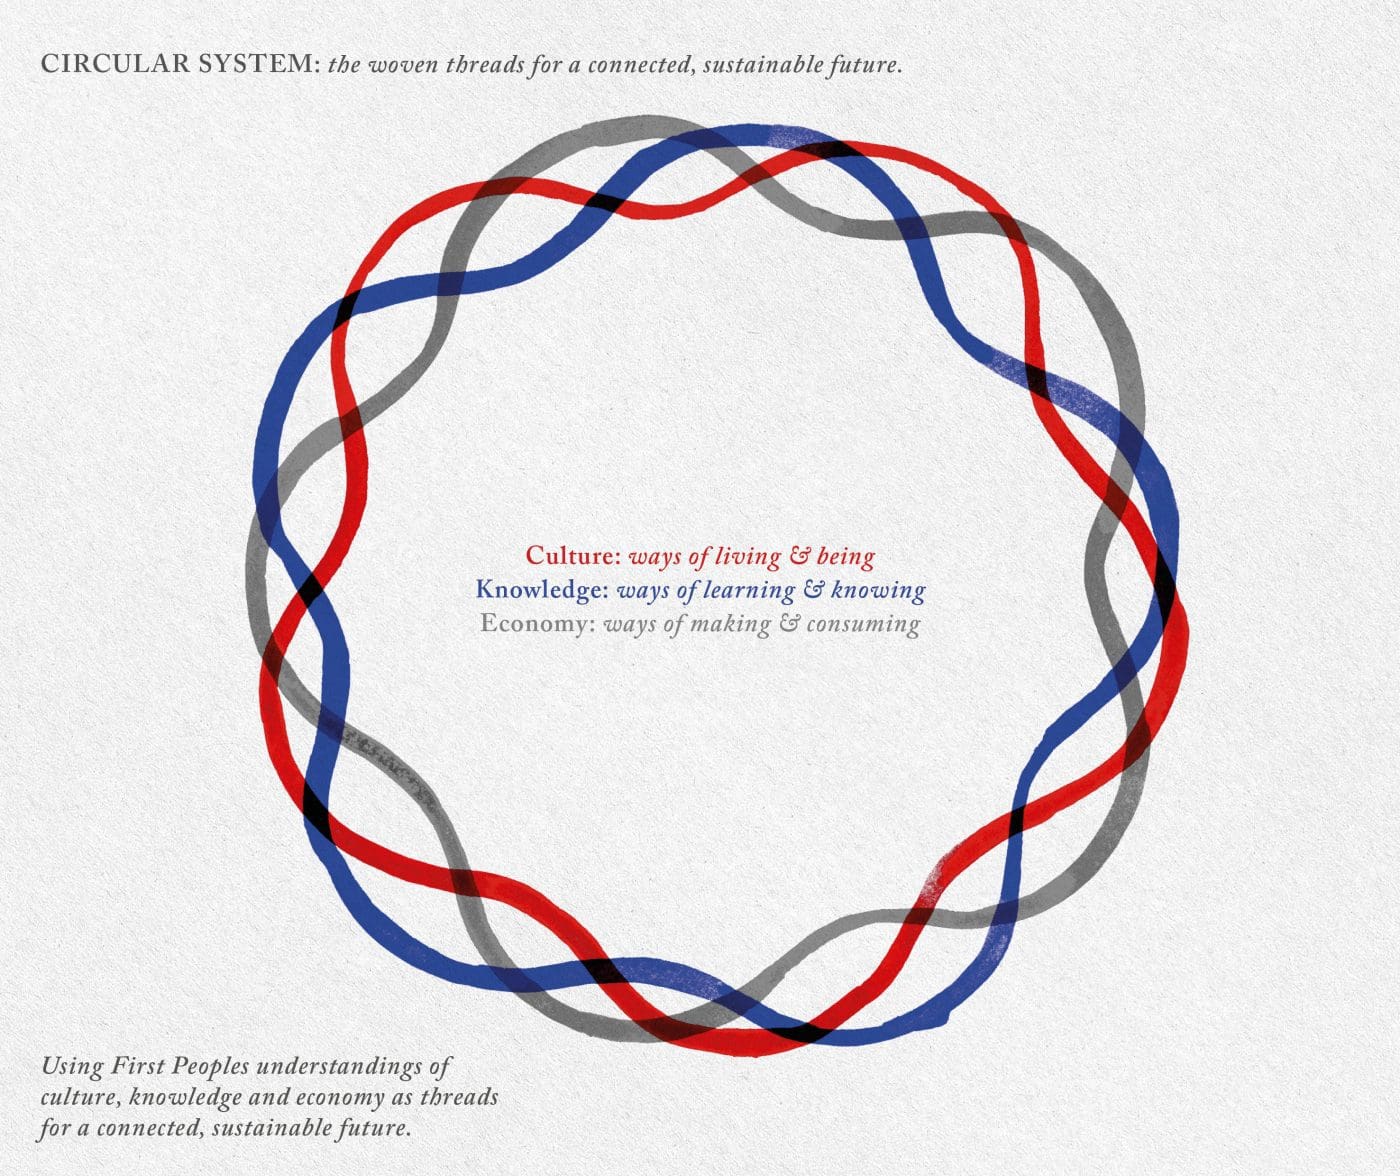 Image Description - Heading text: CIRCULAR SYSTEM: the woven threads for a connected, sustainable future. Graphic depicting 3 interwoven coloured lines, looping around to form a circle. Line 1 representing culture is red. Line 2 representing knowledge is blue. Line 3 representing the economy is grey. These lines represent woven threads of systems which need to work together for a connected, sustainable future. Paragraph list: Culture: ways of living & being. Knowledge: ways of learning & knowing. Economy: ways of making & consuming. Footnote: Using First Peoples' understandings of culture, knowledge and economy as threads for a connected, sustainable future.